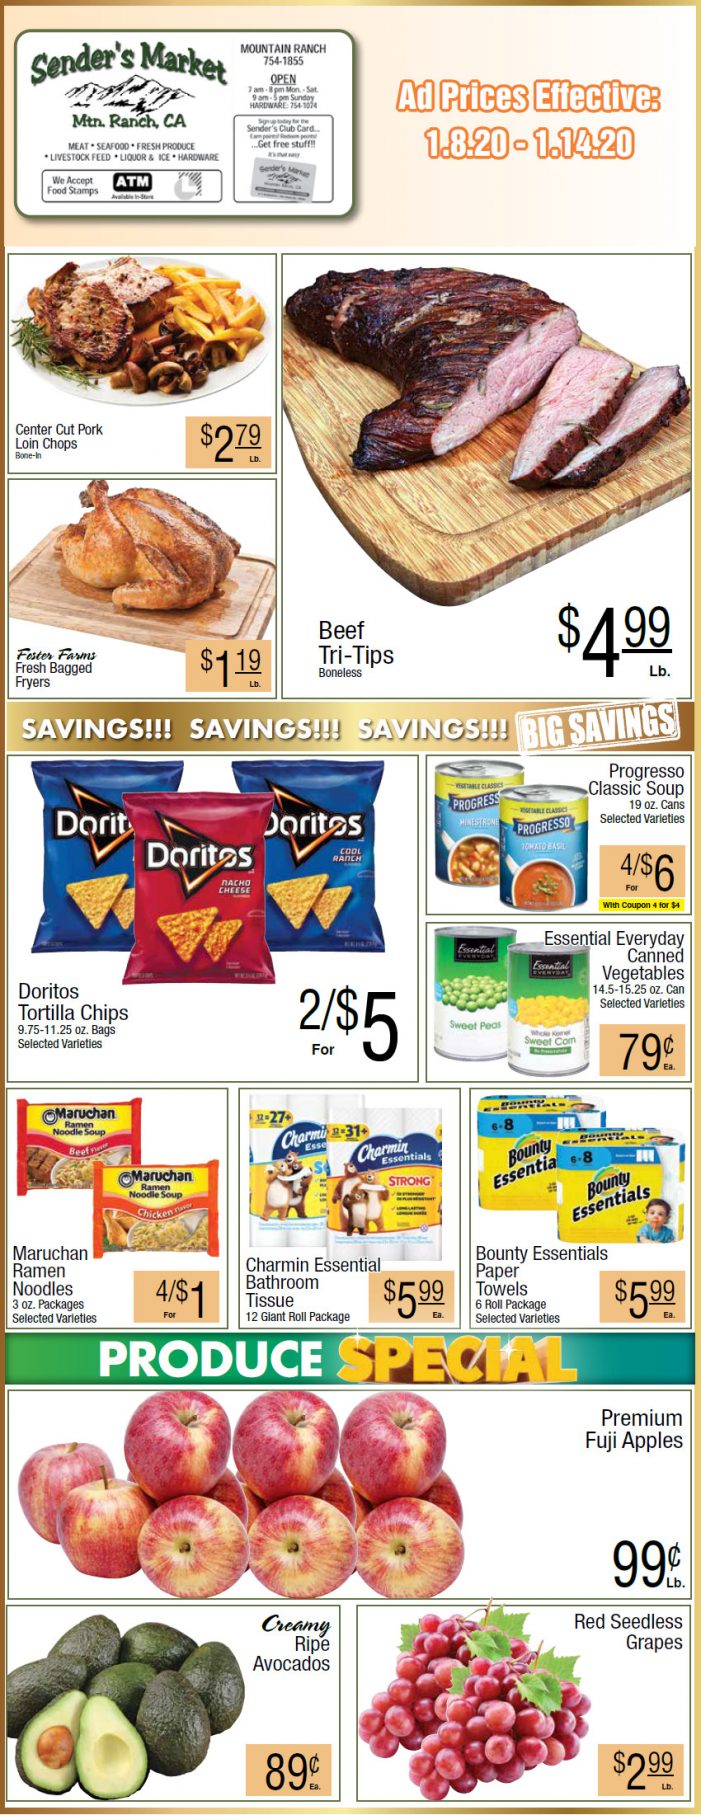 Sender’s Market’s Grocery Ad & Grocery Specials Through January 14th